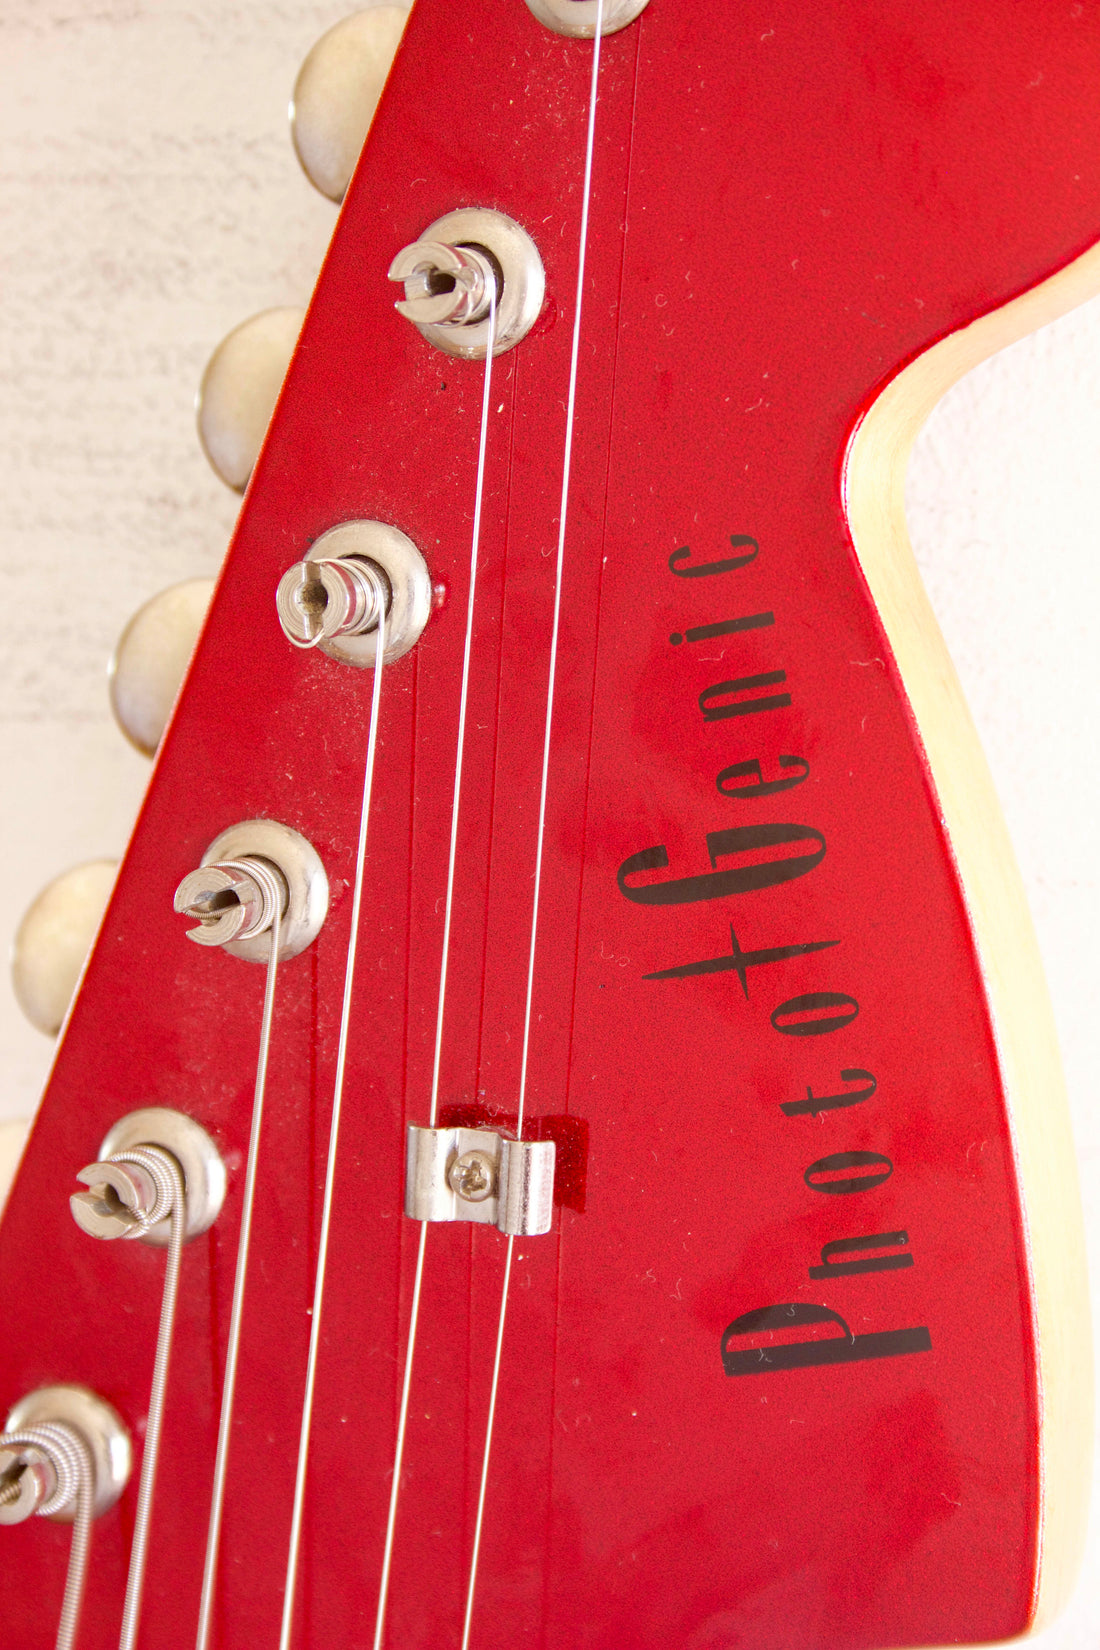 Photogenic Johnny Marr Jag Copy Candy Apple Red – Topshelf Instruments